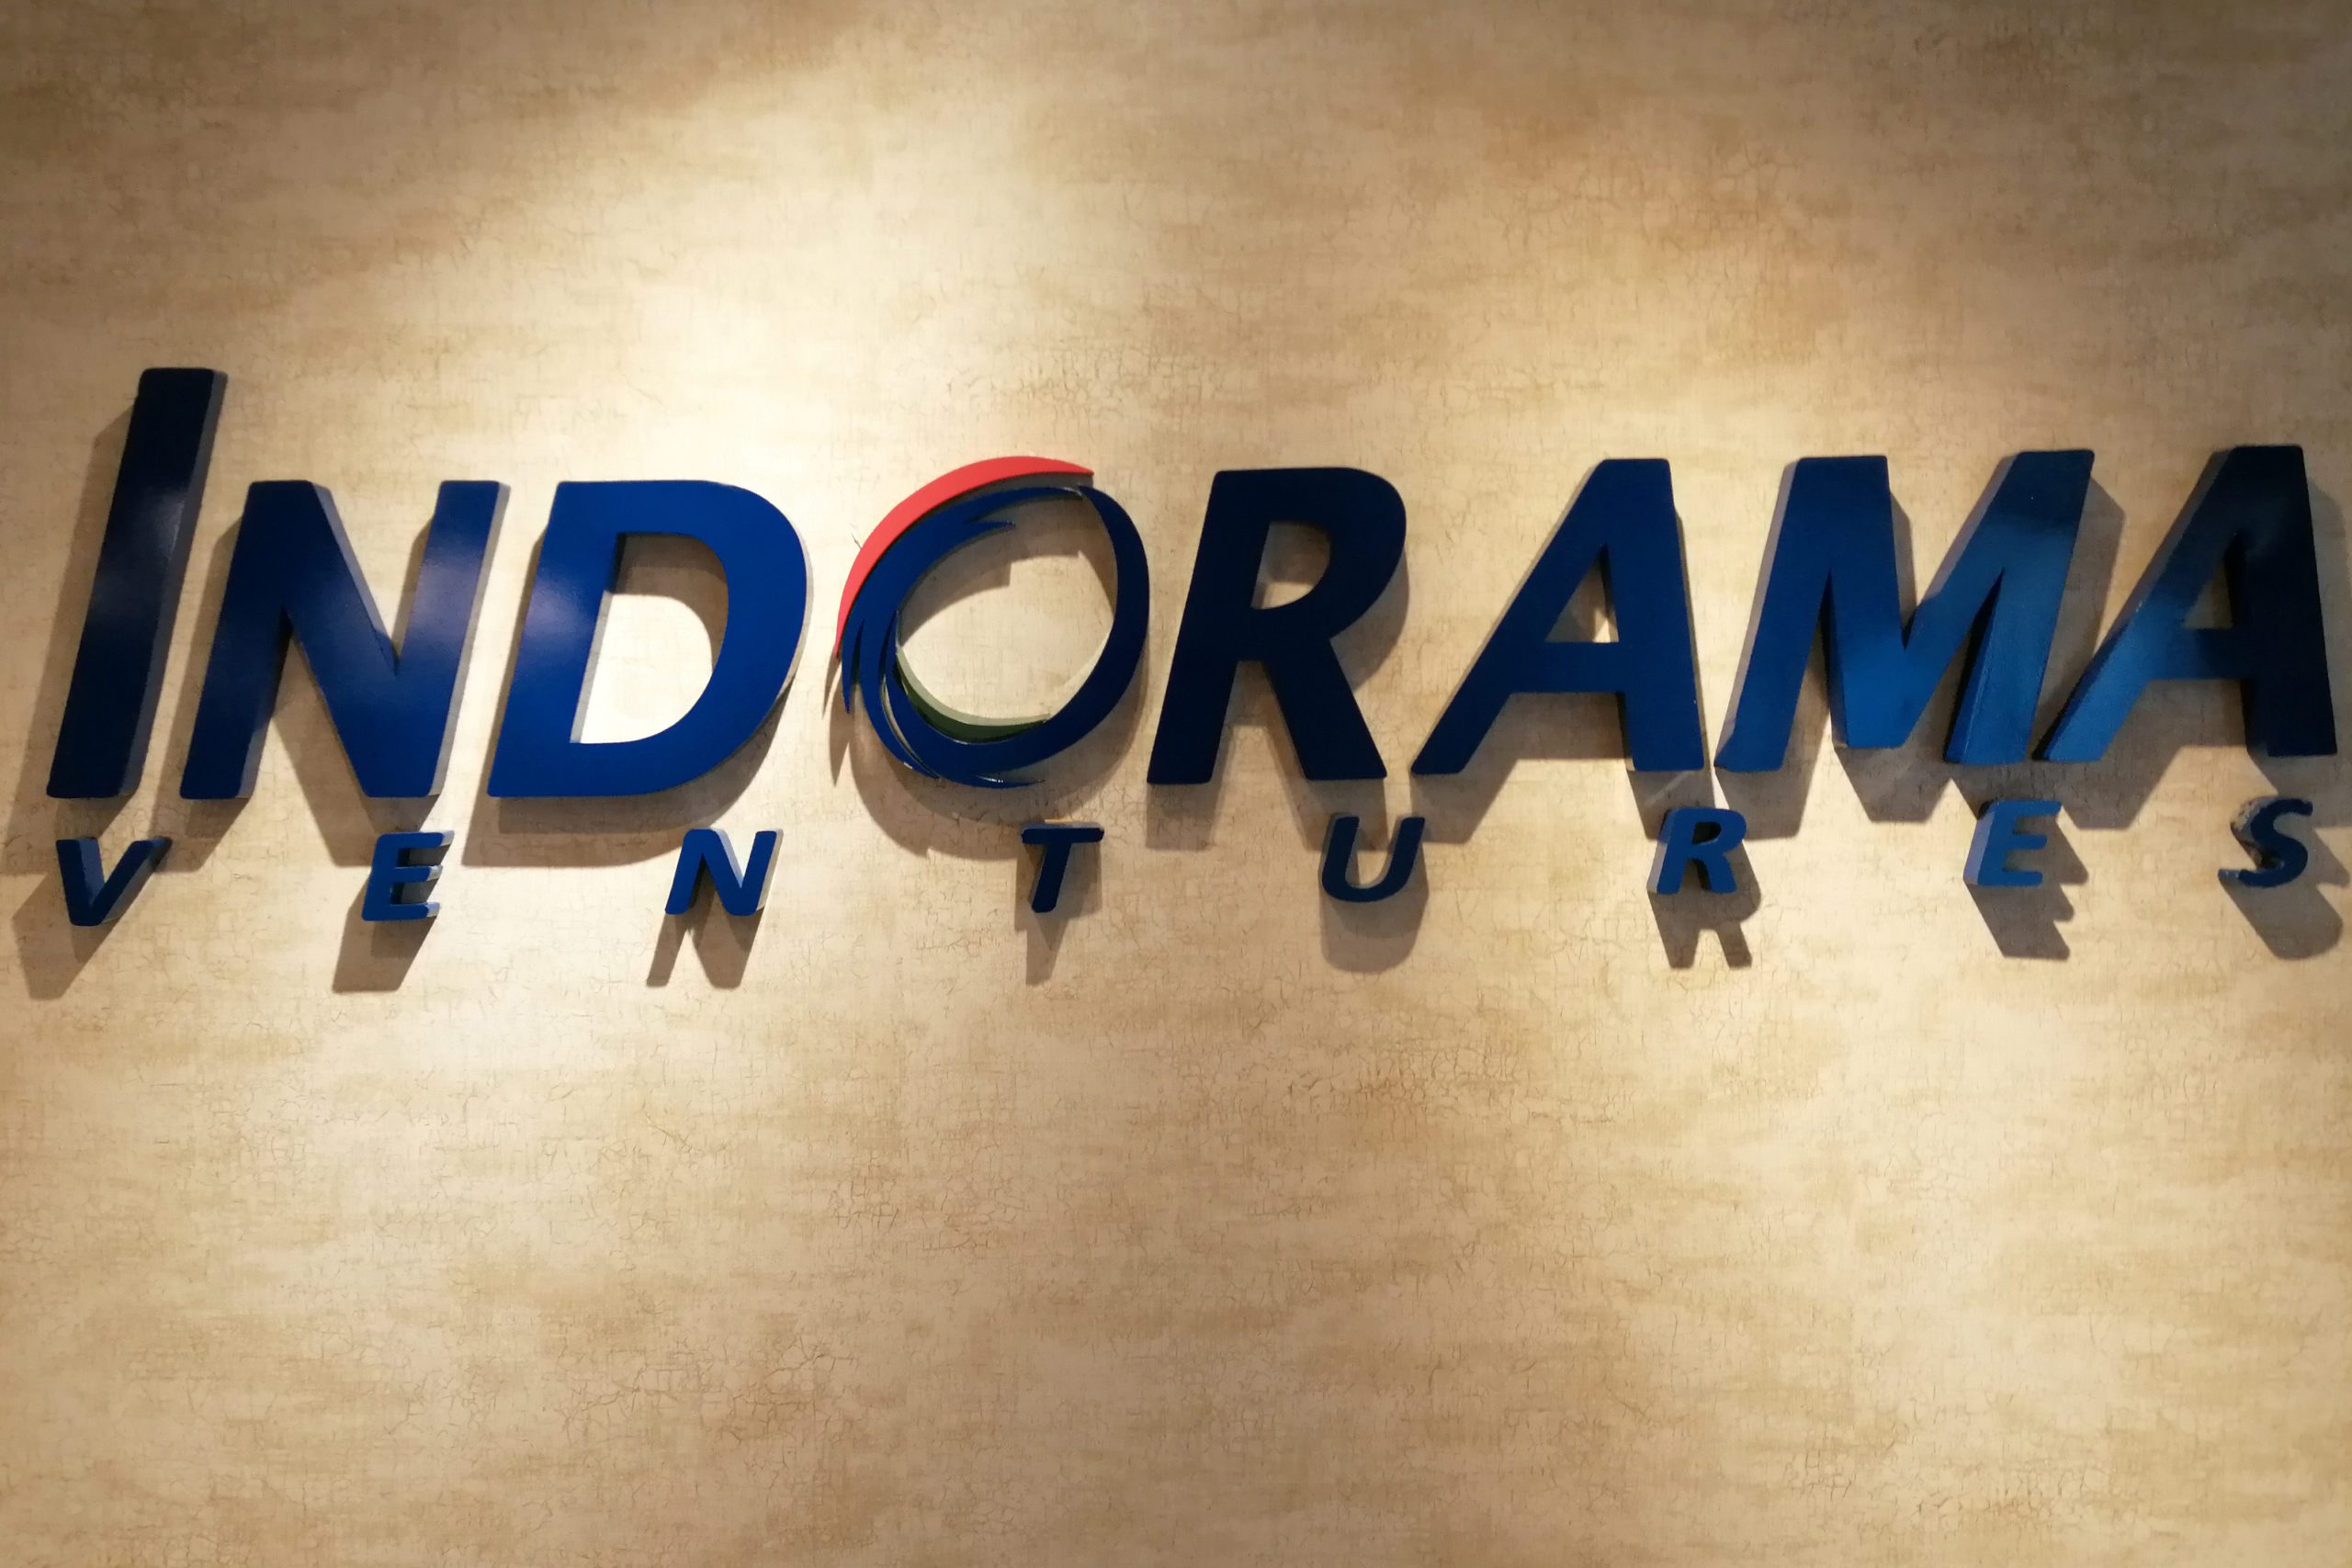 Thai petrochemical group Indorama Ventures scouts for acquisitions in Europe, Africa